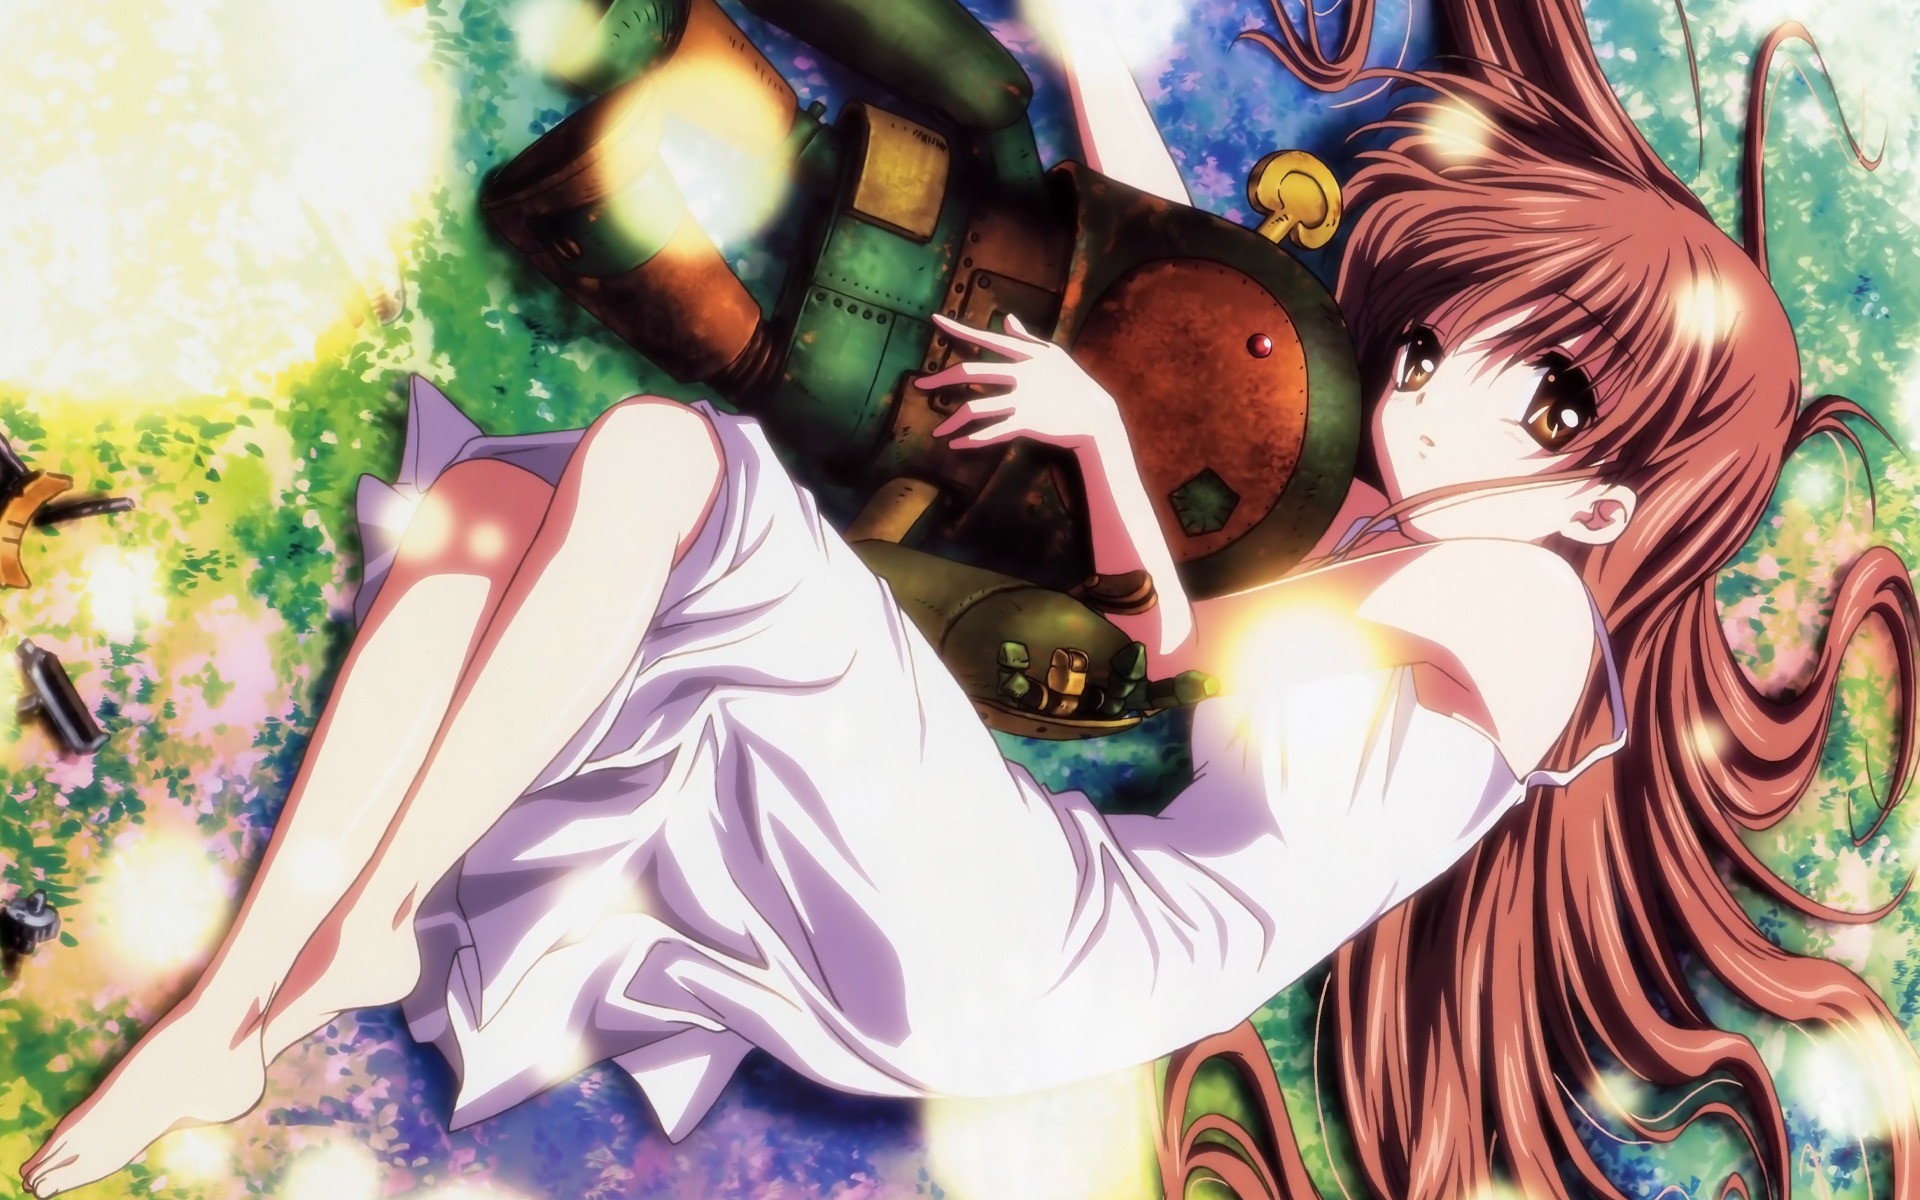 1920x1200 Wallpapers of Clannad After Story Anime 0 HTML code. clannad -clannad_00401818.jpg